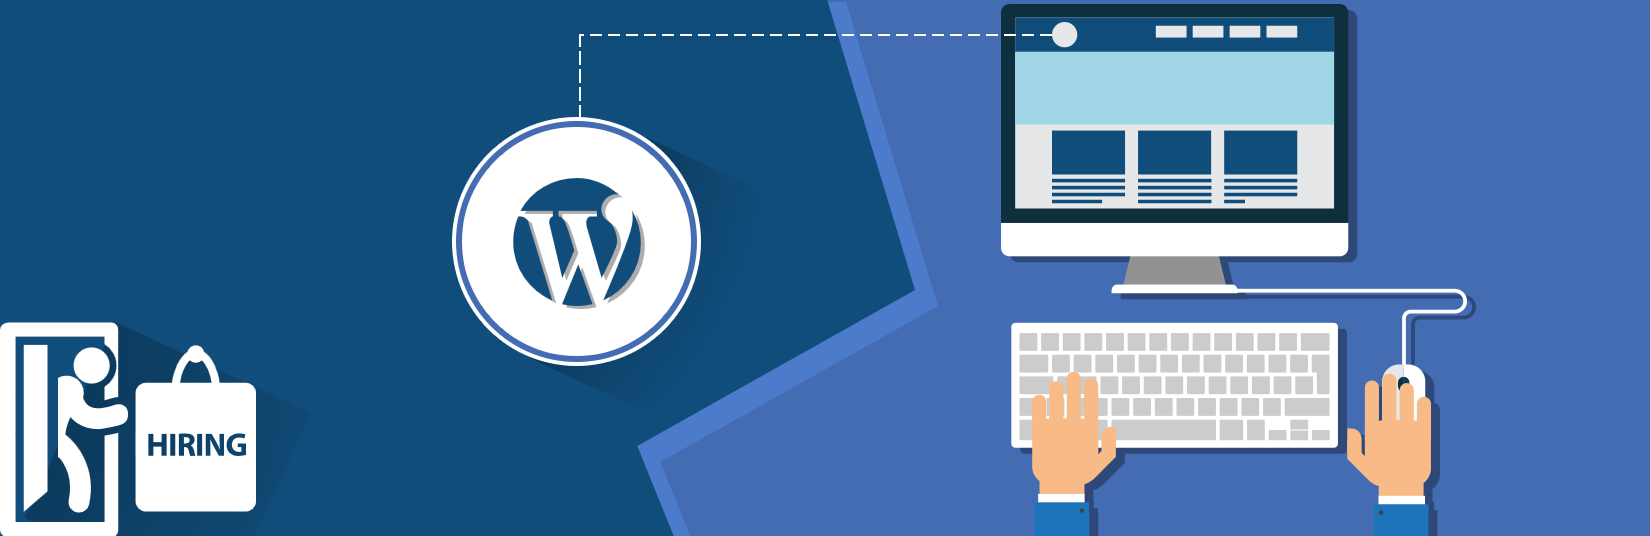 How to Choose the Right WordPress Theme for Your Website